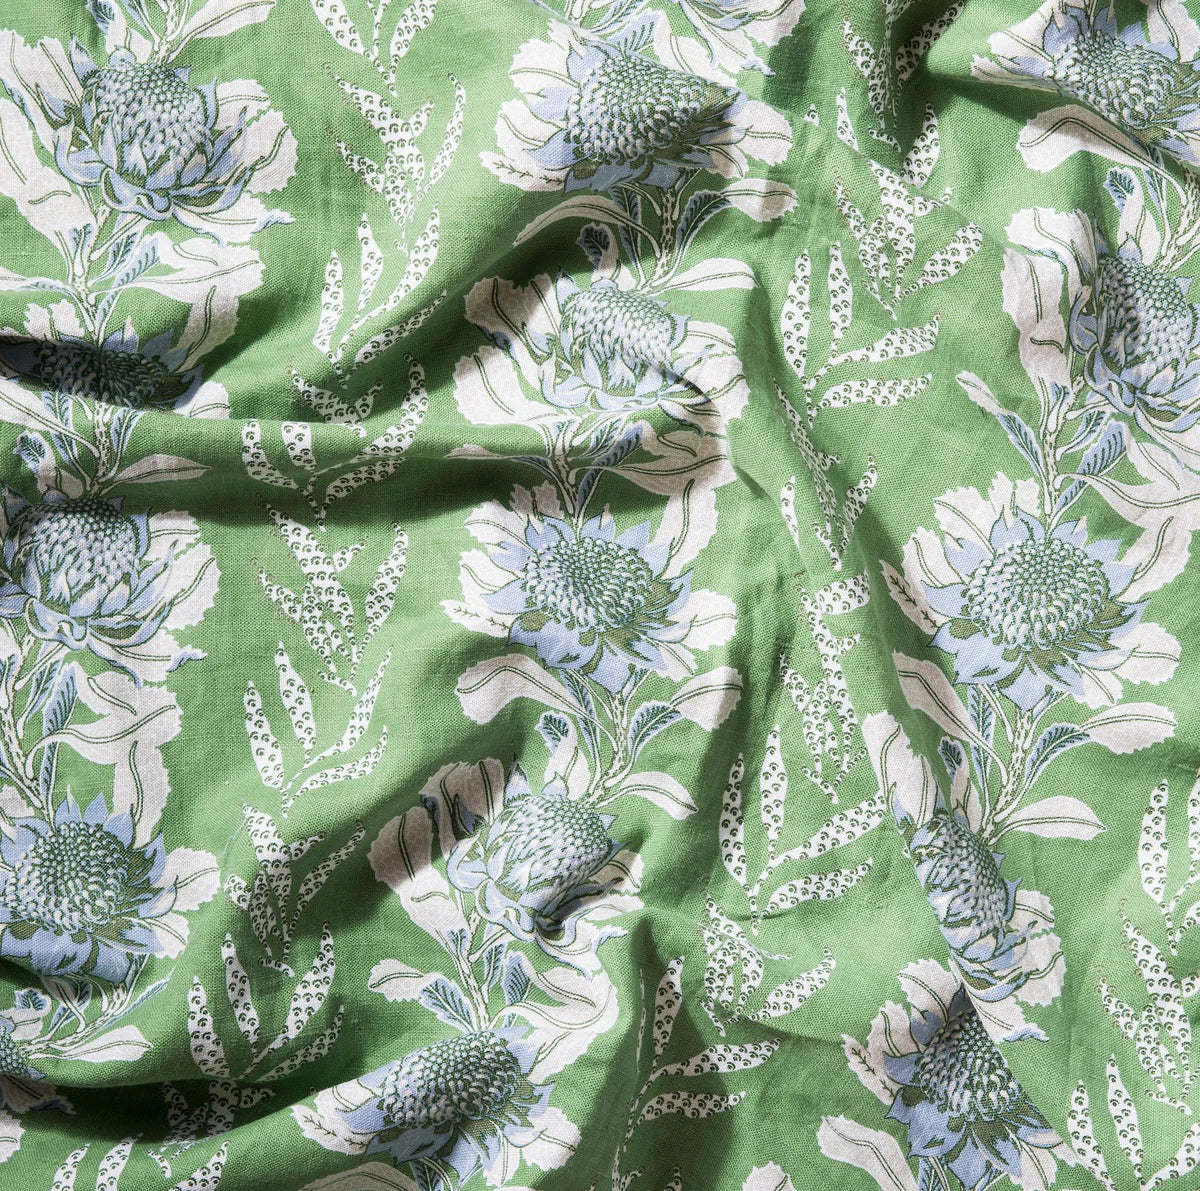 Draped fabric in a linear floral print in shades of cream and light blue on a green field.